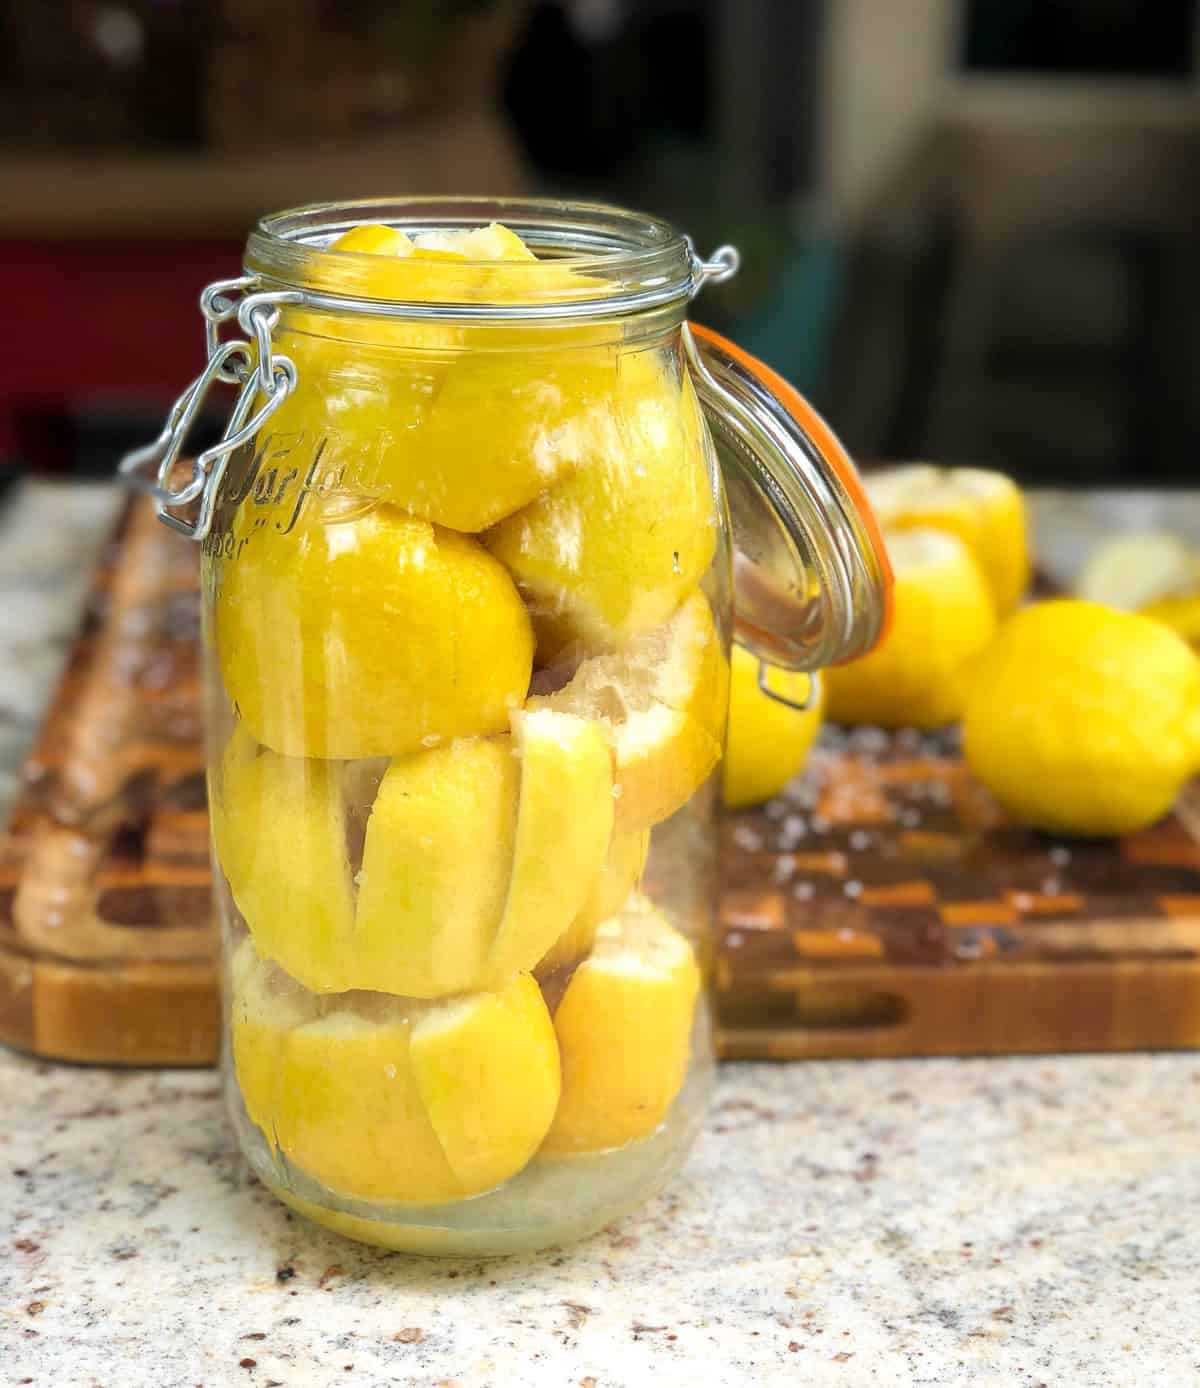 place all the lemons in a clean jar and push down to get them squished in.